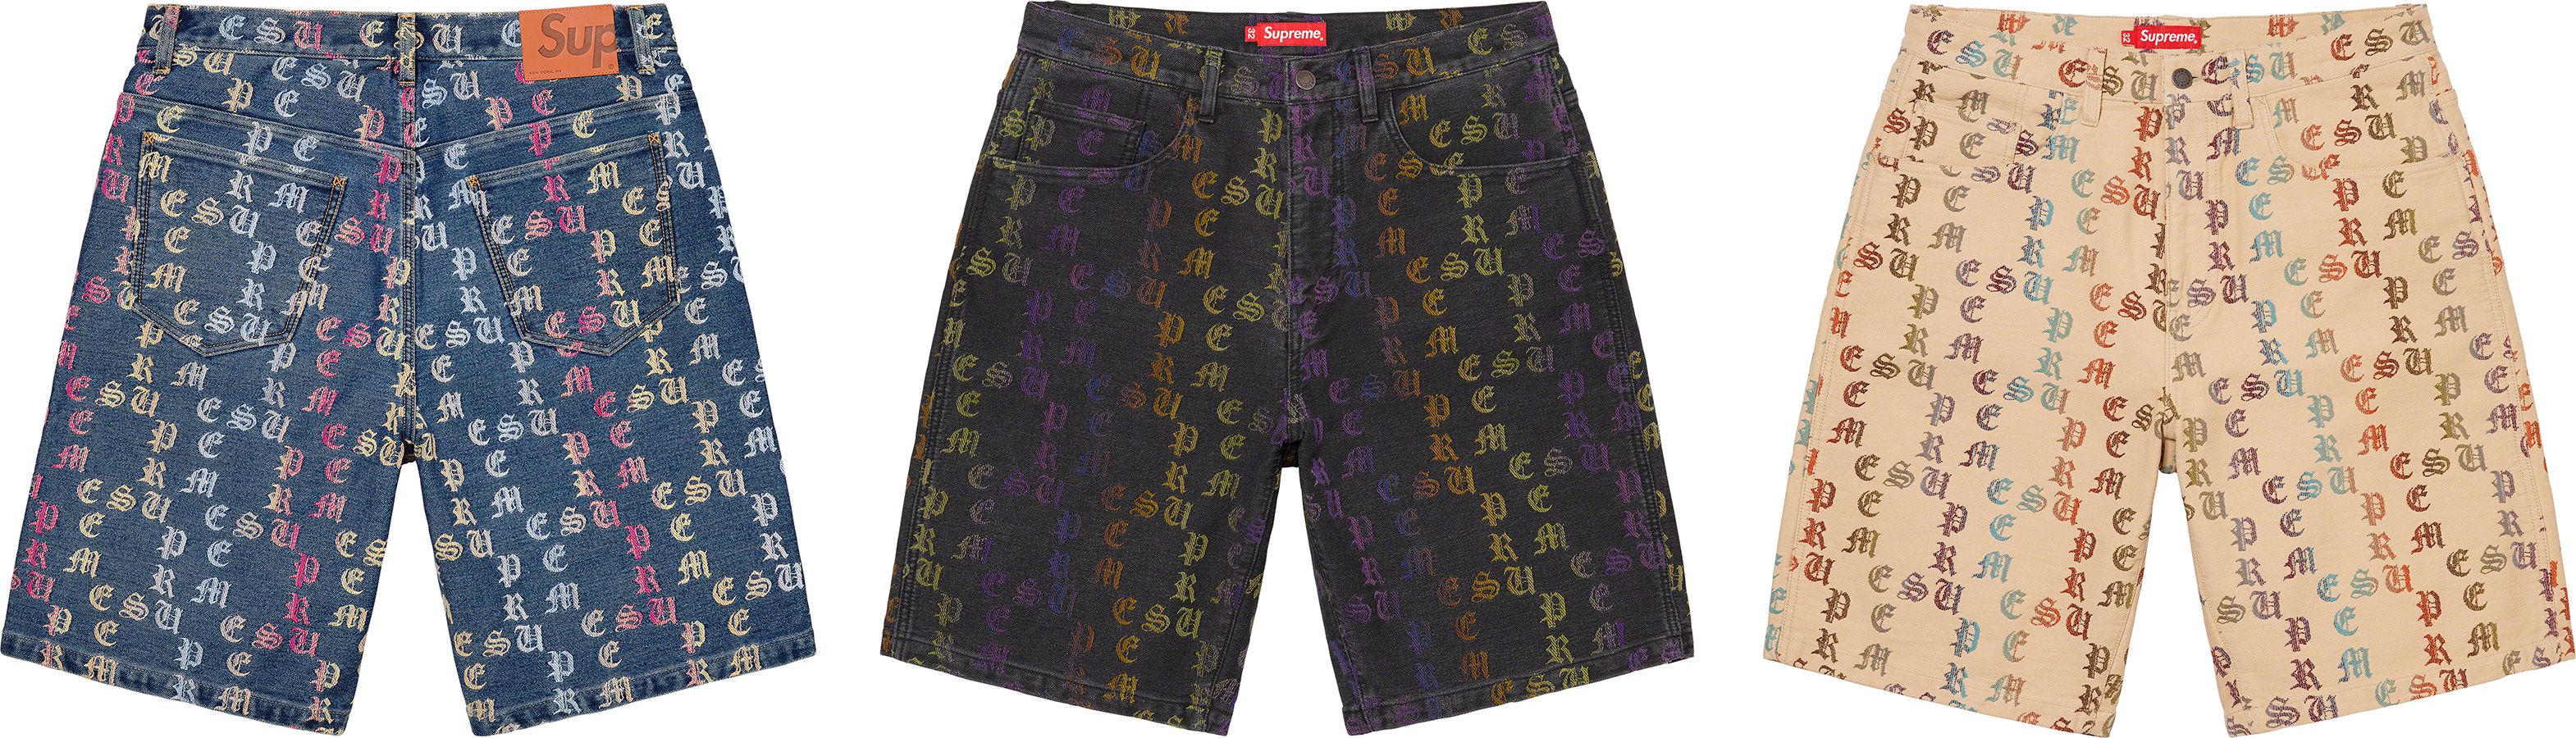 Abstract Textured Knit Short – Supreme